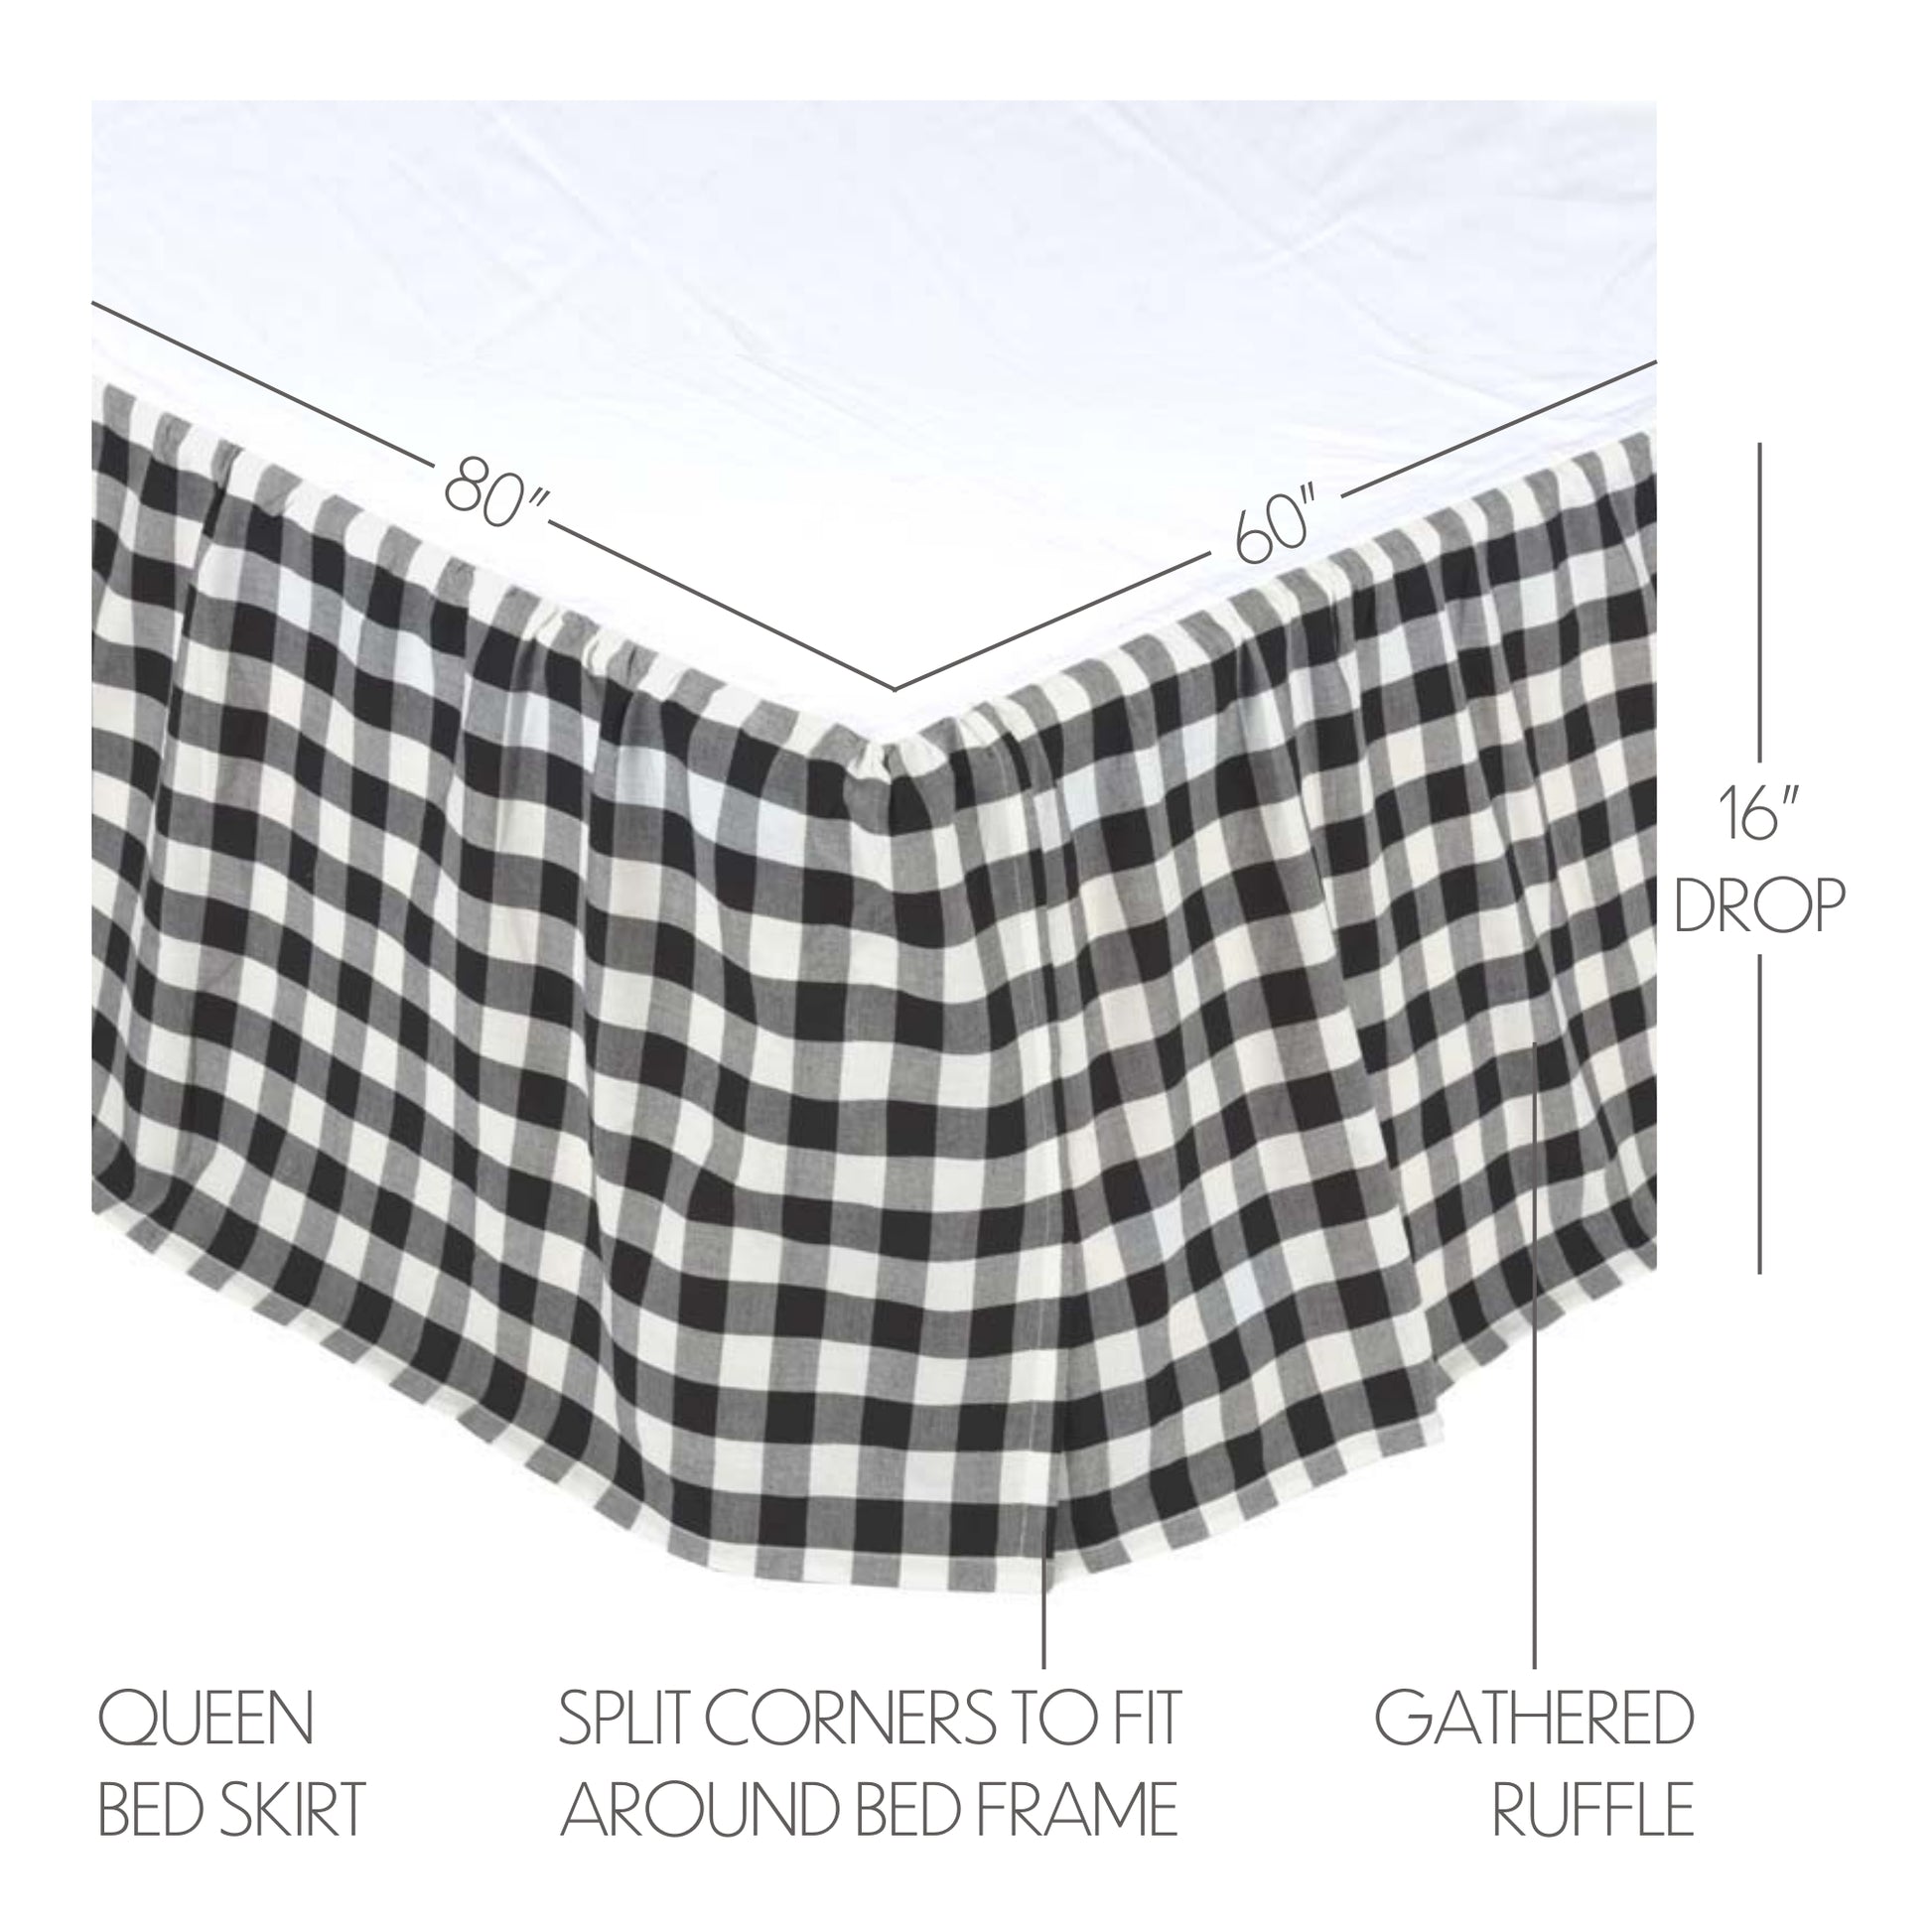 40407-Annie-Buffalo-Black-Check-Queen-Bed-Skirt-60x80x16-image-2